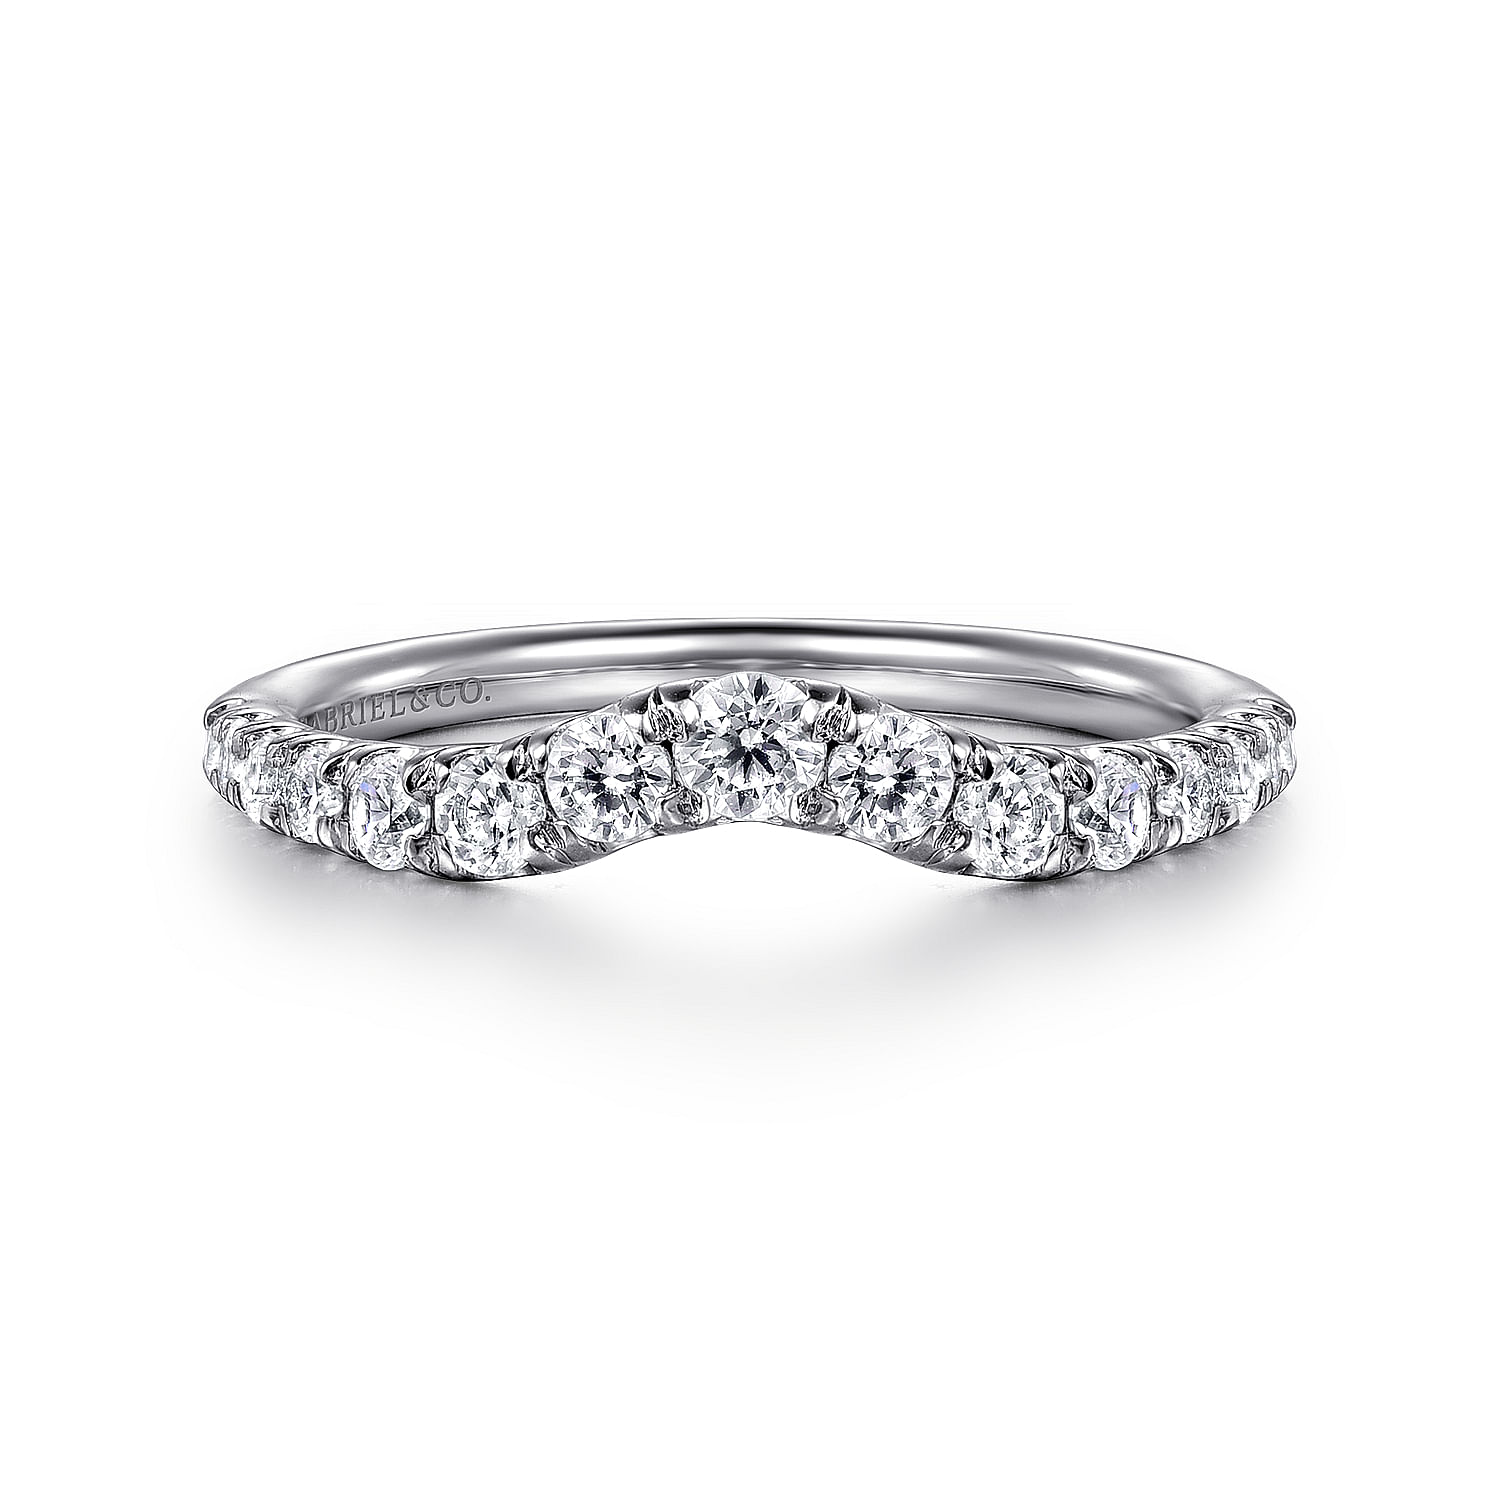 Chambery - Curved 14K White Gold French Pave Diamond Wedding Band